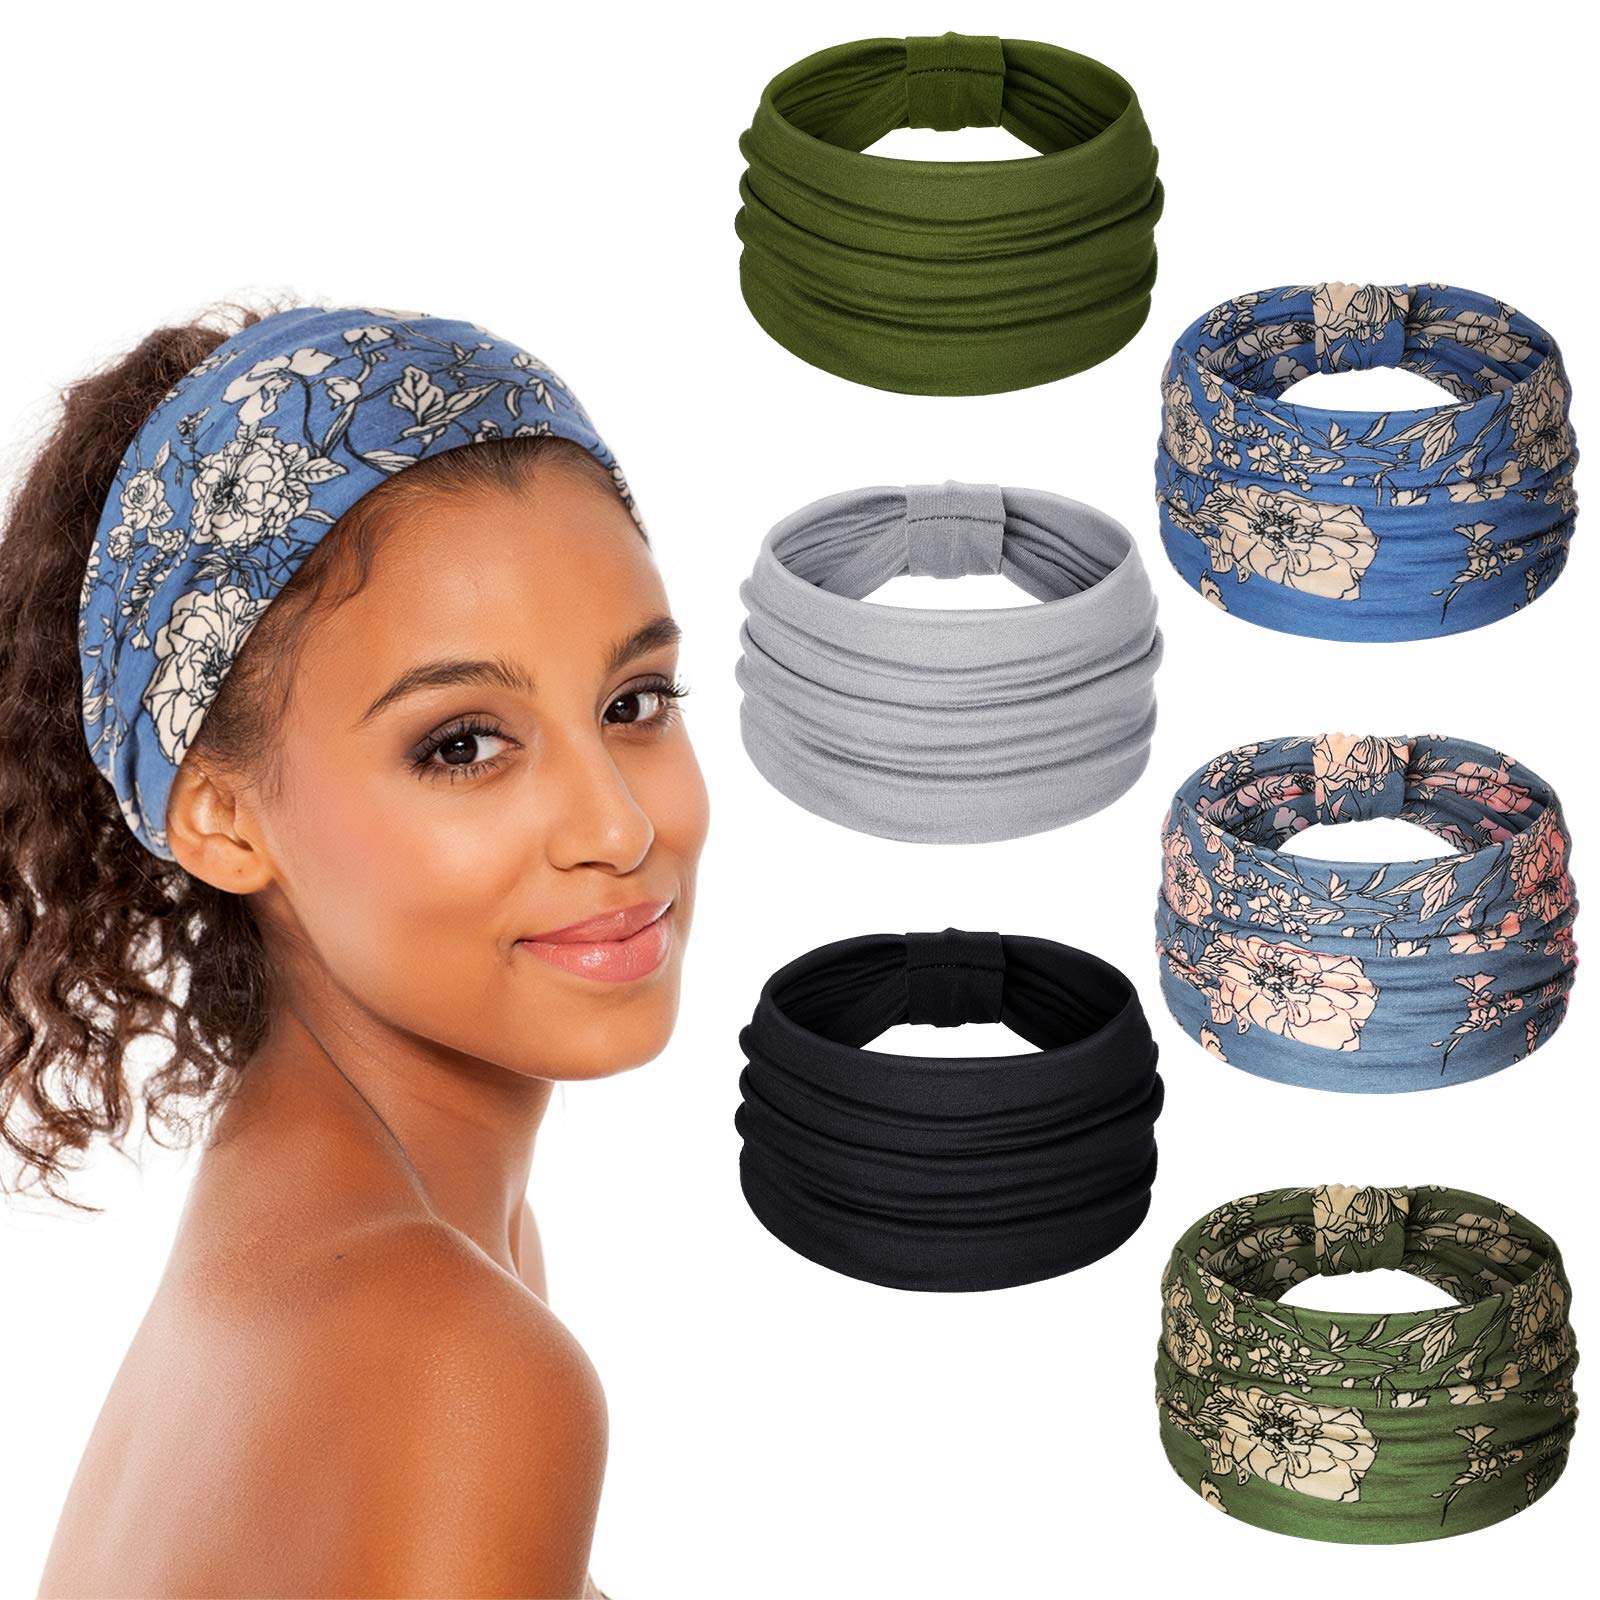  Chuangdi 6 Pieces Headband with Buttons for Mask African Boho  Knot Turban Headbands Nurse Elastic Headbands Beach Hair Accessories for  Valentine's Day Women Girl (Elegant Patterns) : Beauty & Personal Care